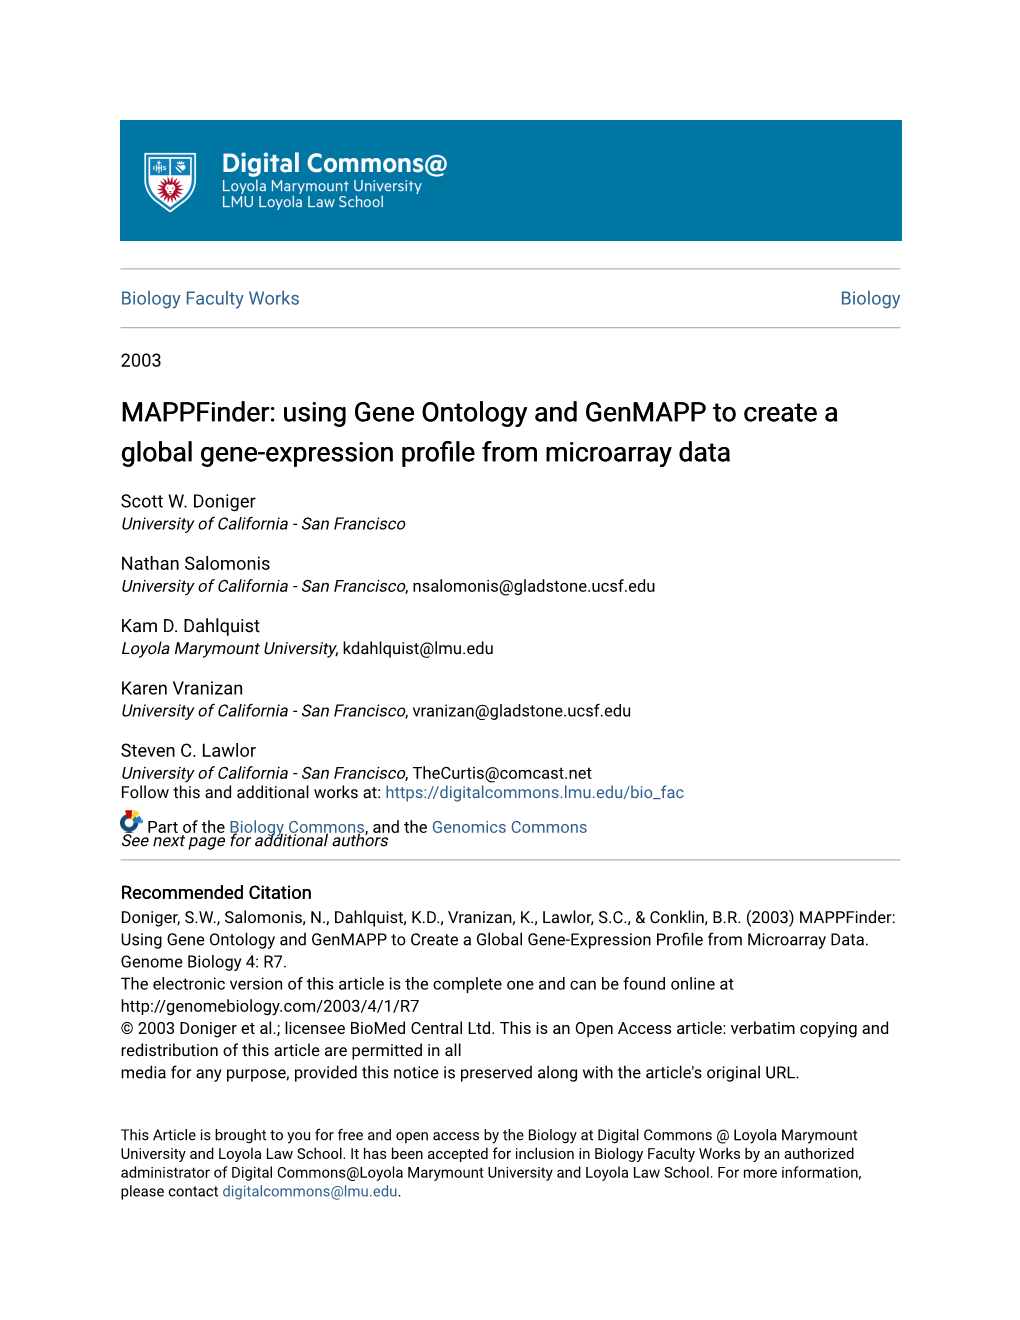 Mappfinder: Using Gene Ontology and Genmapp to Create a Global Gene-Expression Profile from Microarray Data